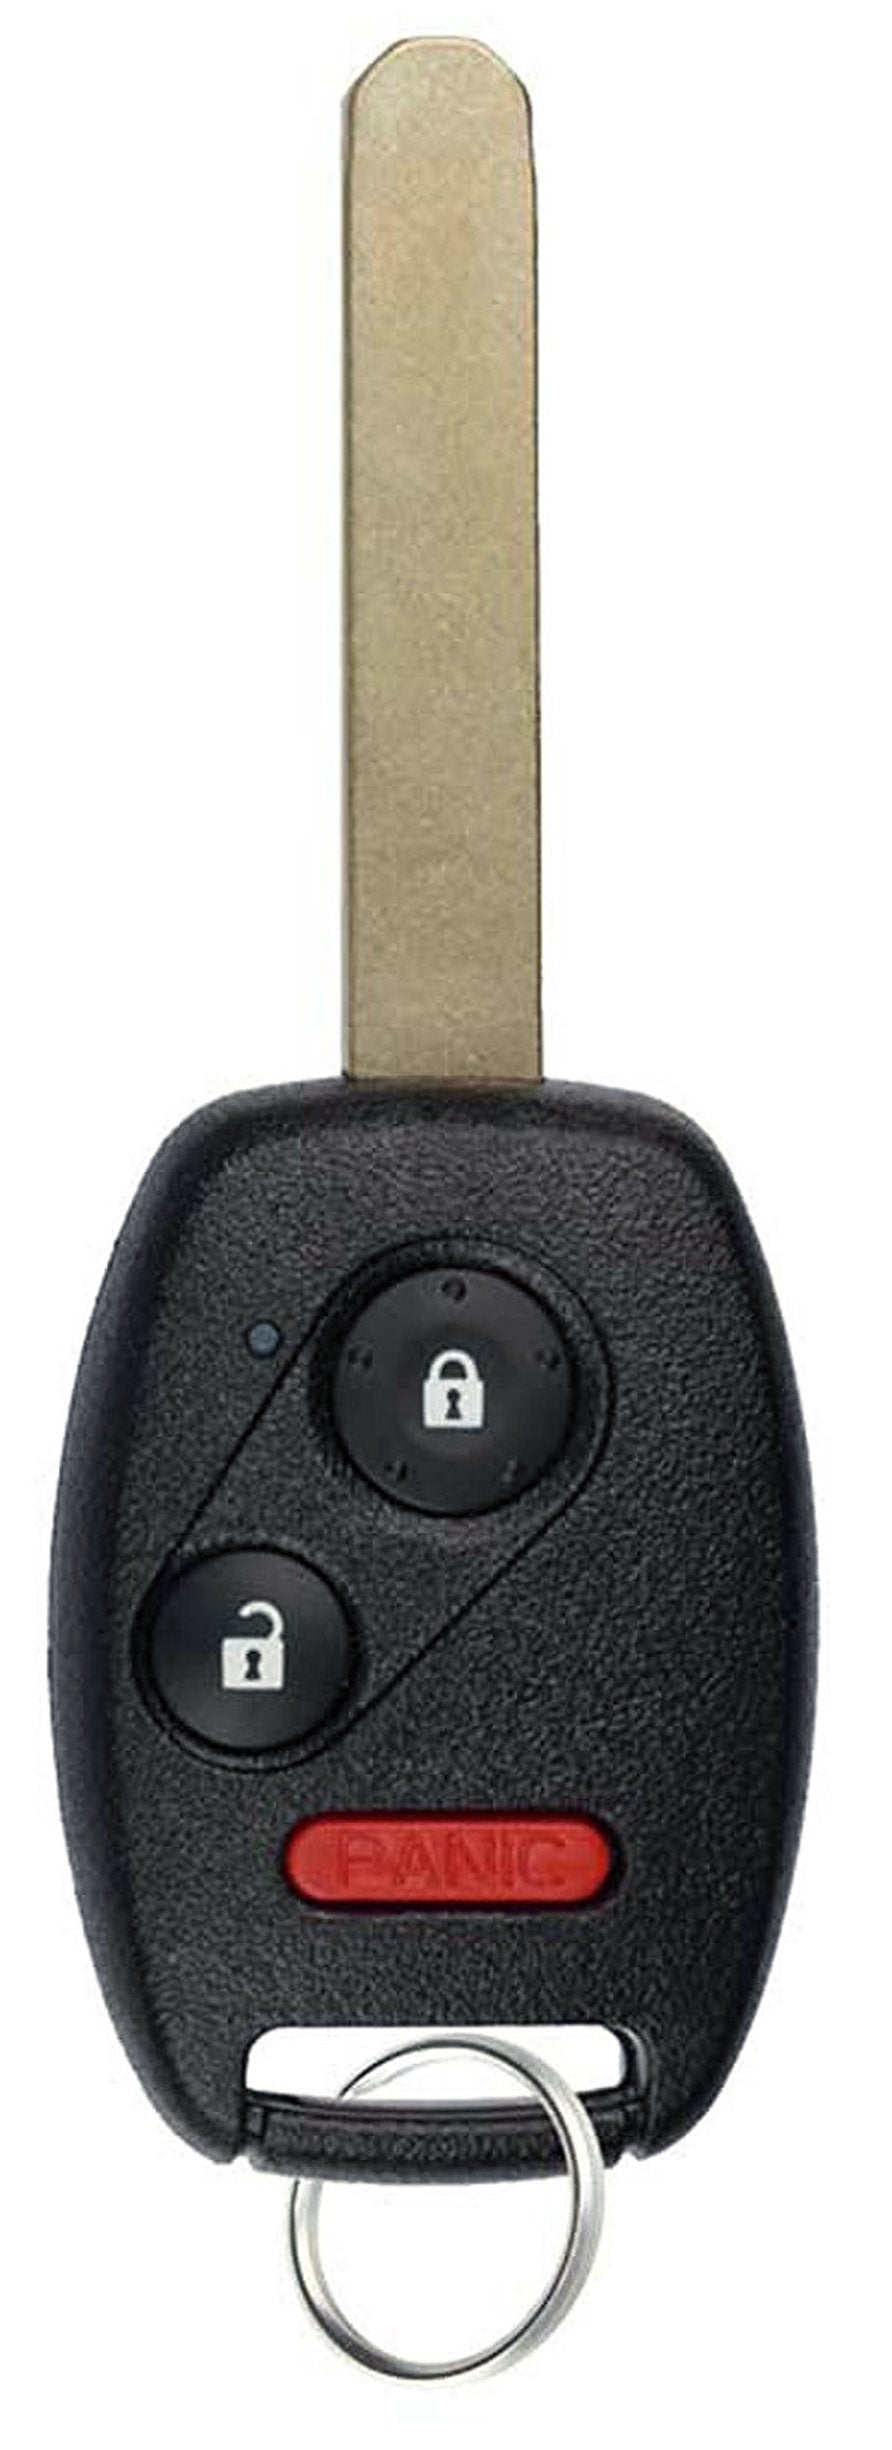  [AUSTRALIA] - KeylessOption Keyless Entry Remote Control Uncut Car Ignition Chip Key Fob Replacement for OUCG8D-380H-A black